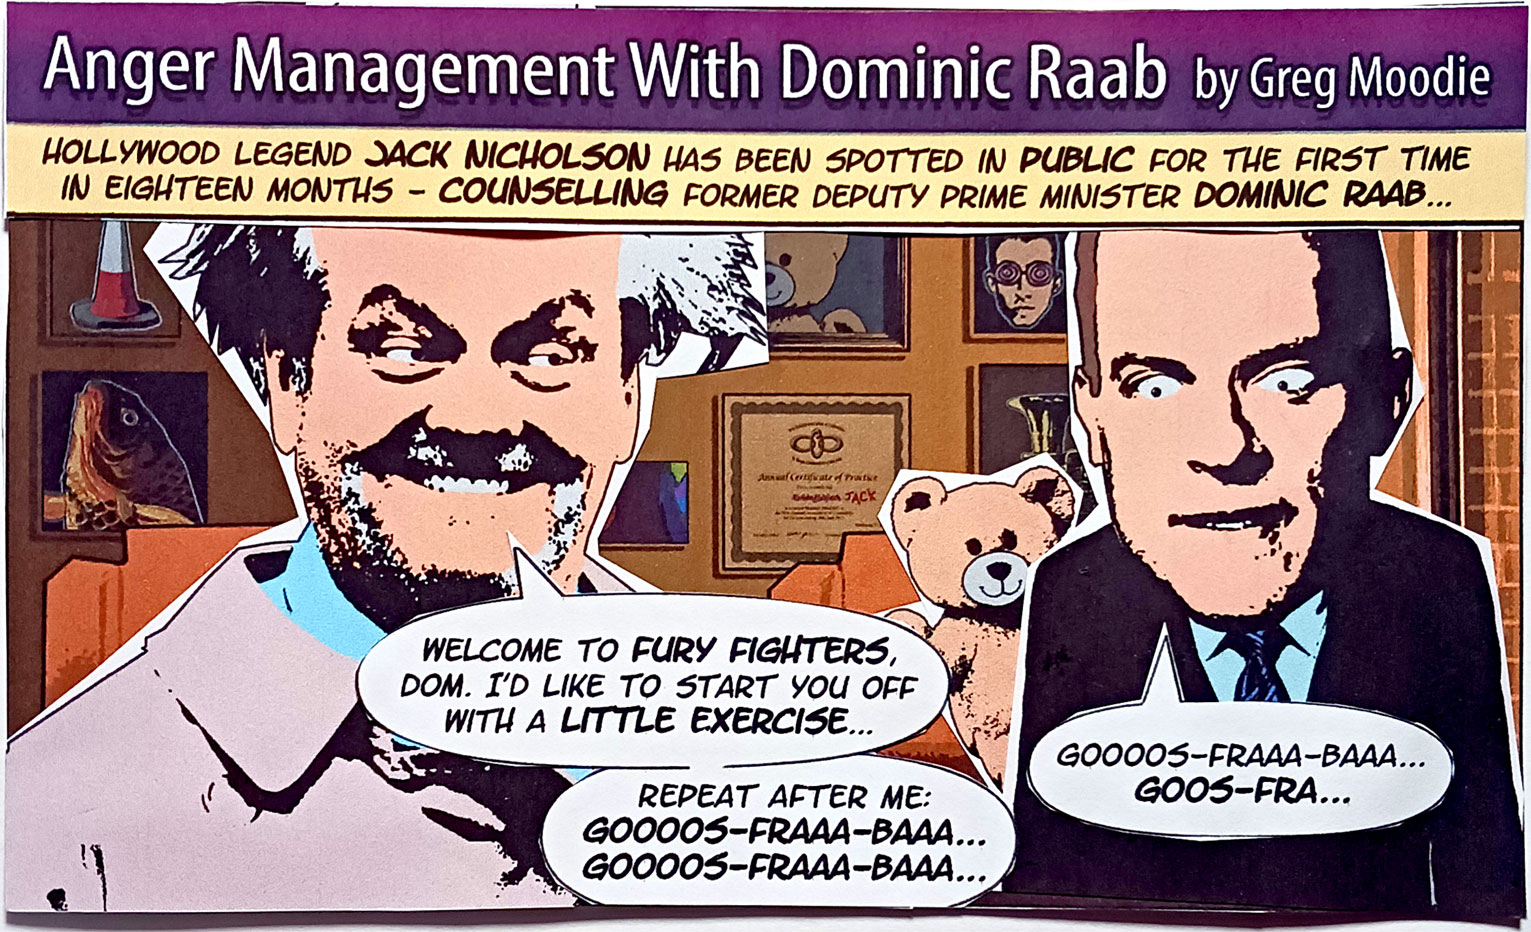 Anger Management With Dominic Raab